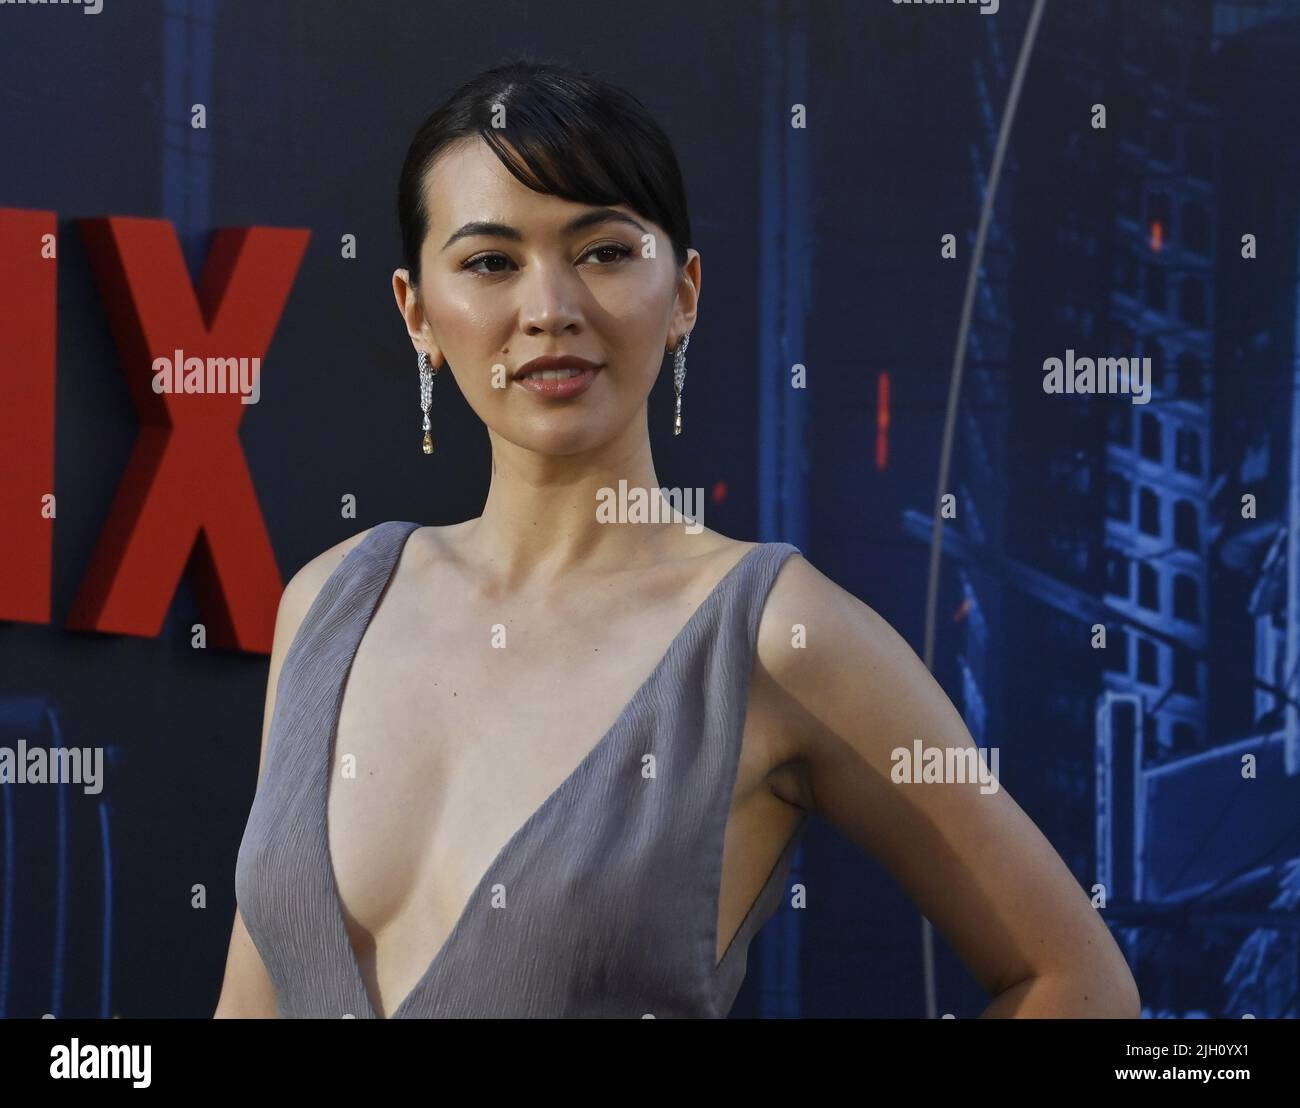 Los Angeles, United States. 14th July, 2022. Cast member Jessica Henwick attends Netflix's premiere of the motion picture drama 'The Gray Man' at the TCL Chinese Theatre in the Hollywood section of Los Angeles on Wednesday, July 13, 2022. Storyline: When the CIA's top asset, his identity known to no one uncovers agency secrets, he triggers a global hunt by assassins set loose by his ex-colleague. Photo by Jim Ruymen/UPI Credit: UPI/Alamy Live News Stock Photo